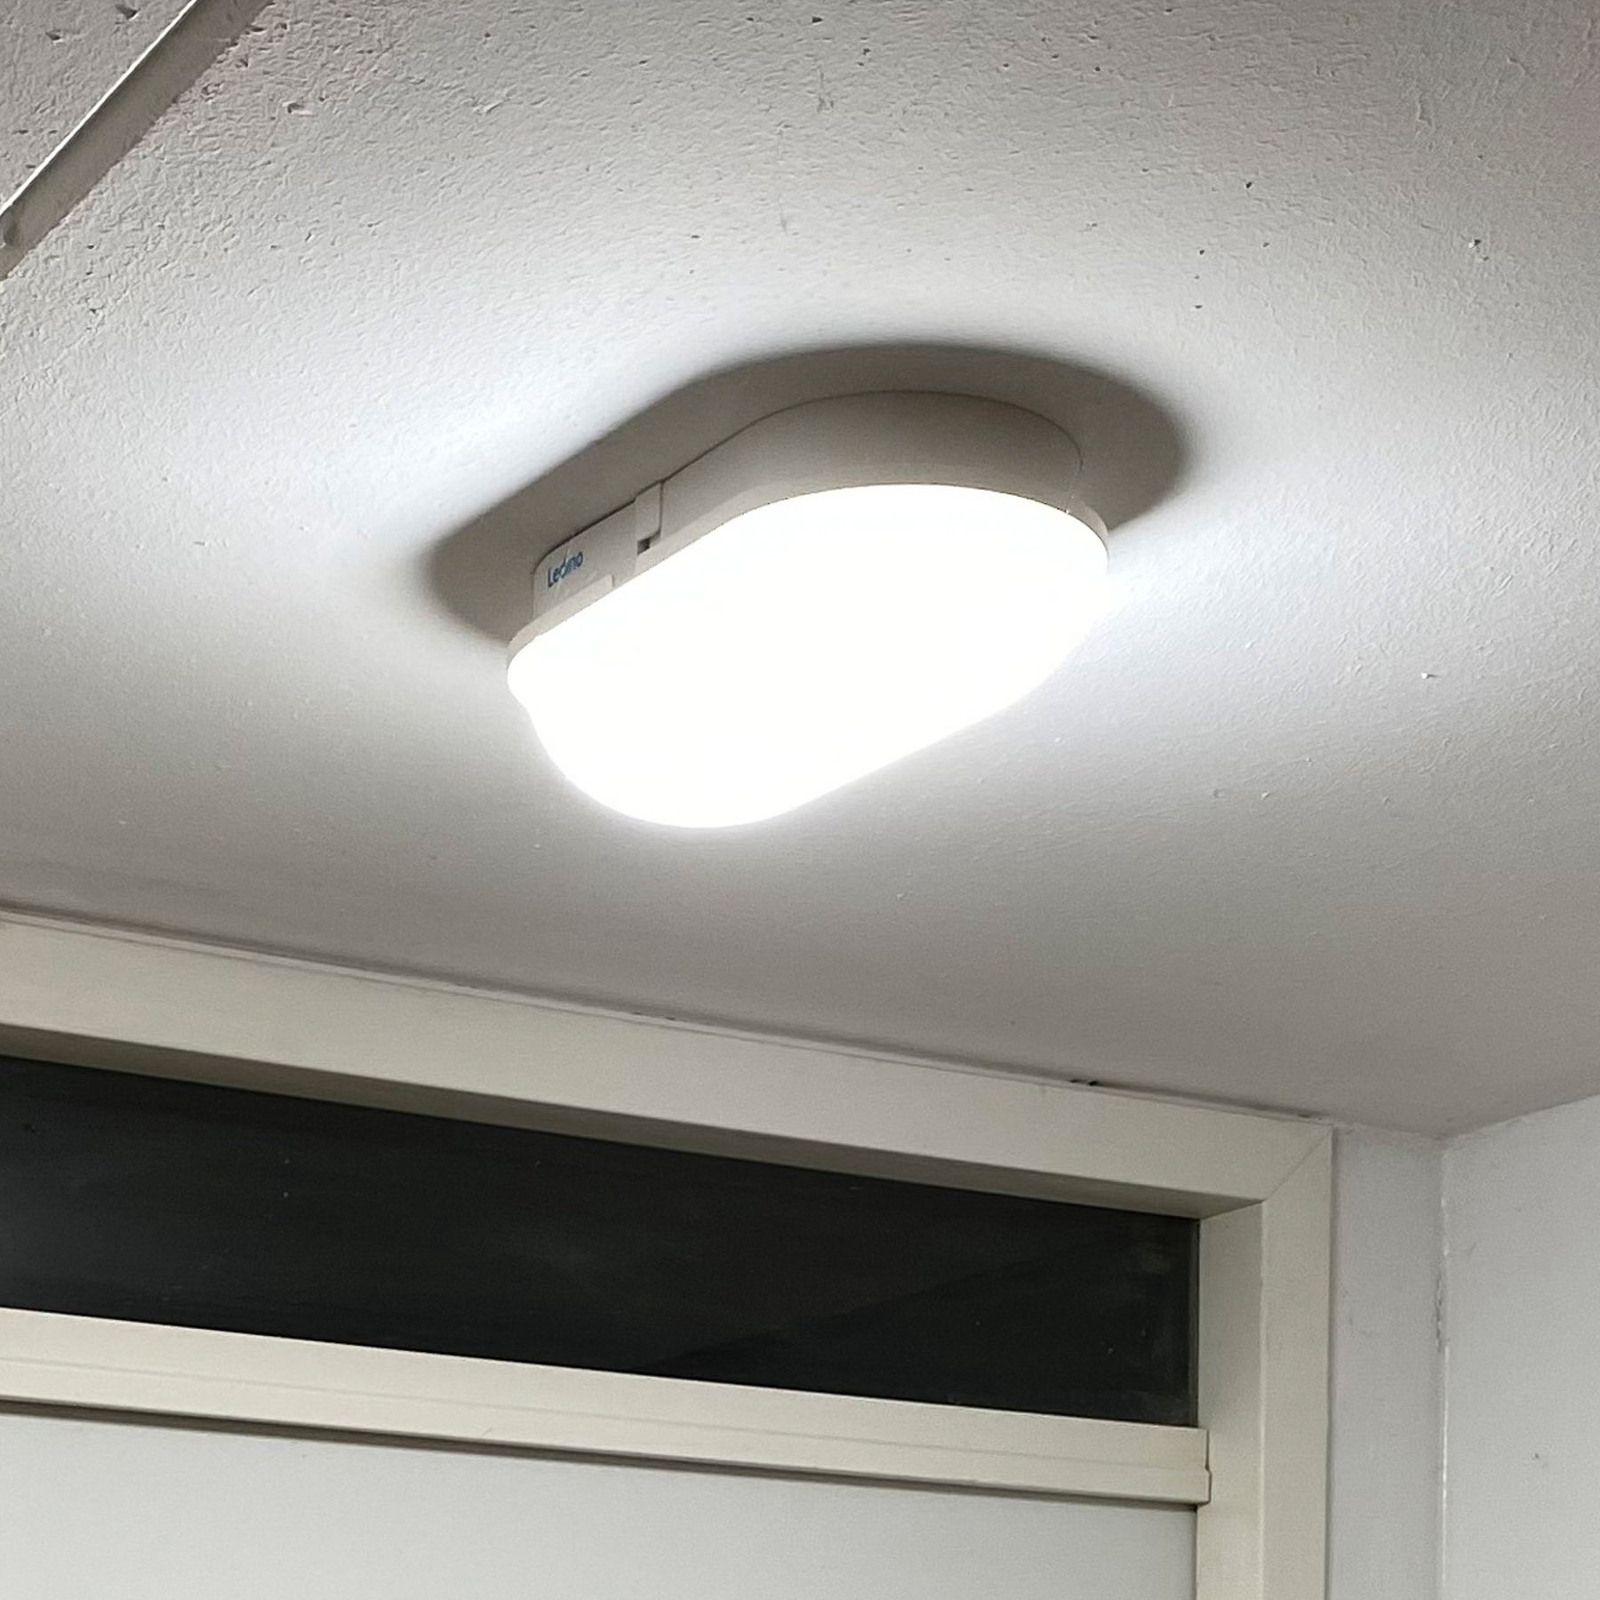 Quickly installed Schwabing XXL LED wall light